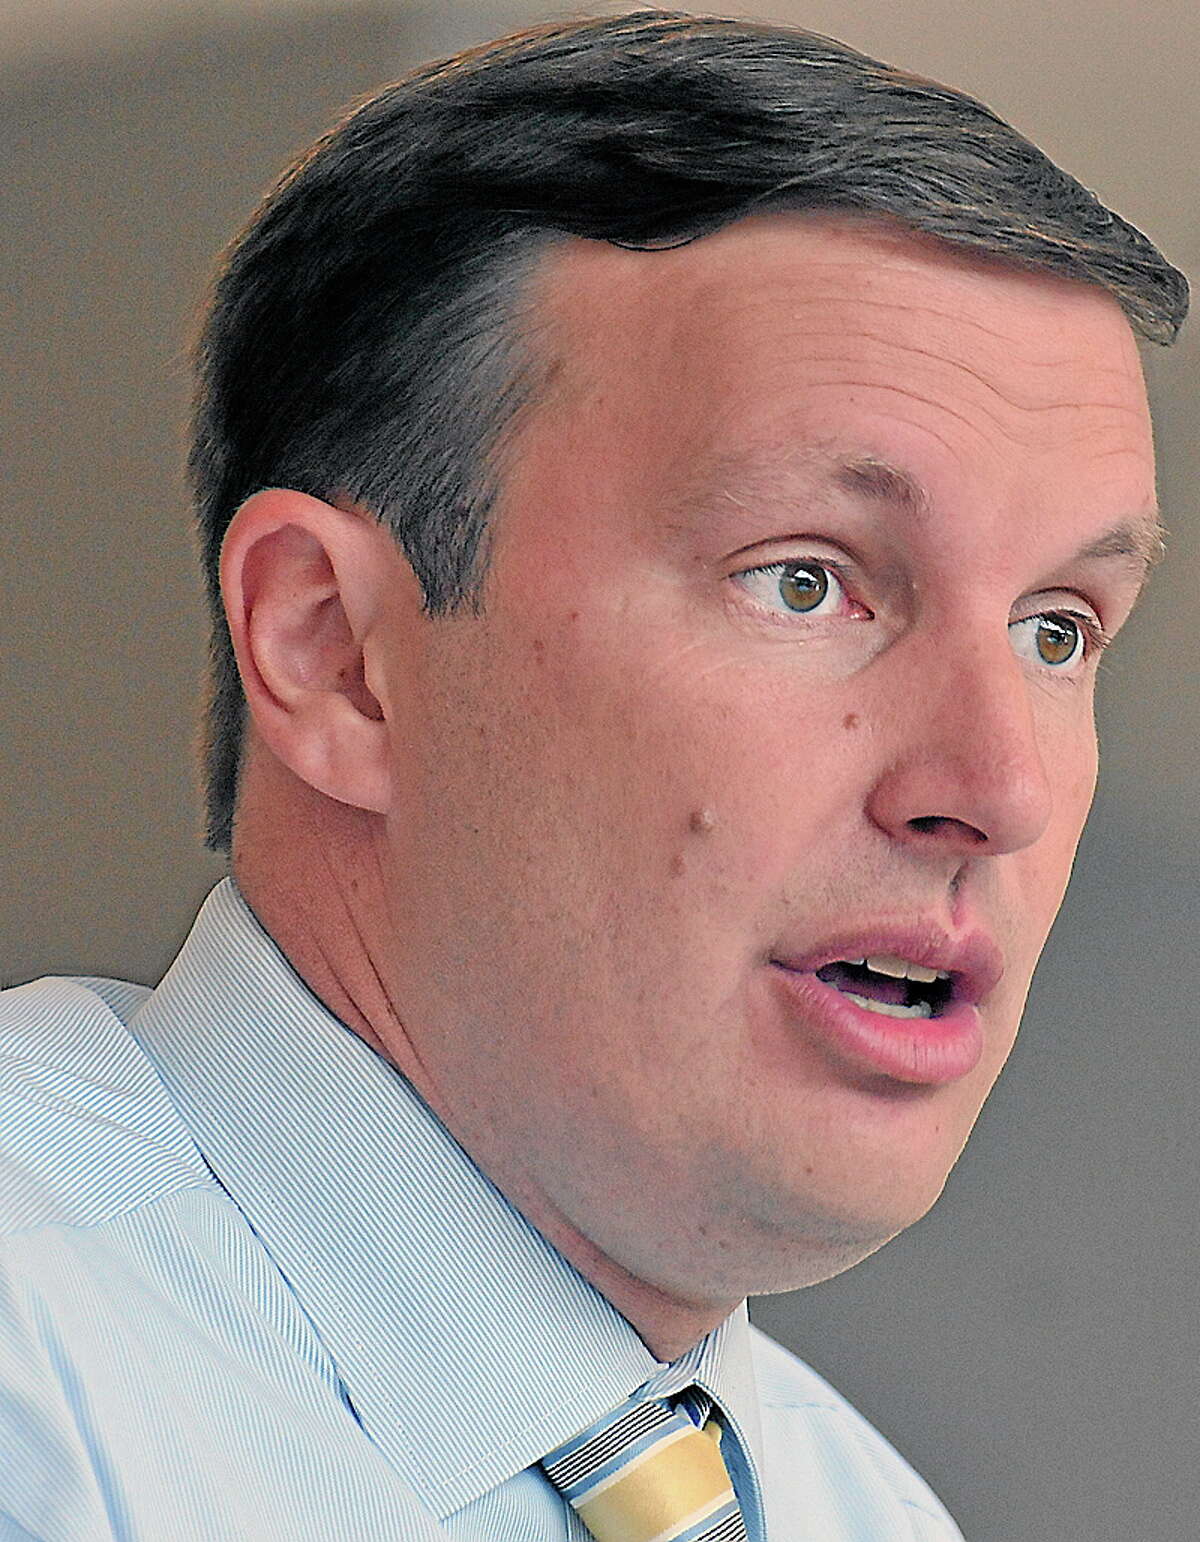 Wallingford-- U.S. Sen. Chris Murphy speaks to employees and media at Proton OnSite, a Wallingford based company that develops Hydrogen Generation Systems. Peter Casolino/New Haven Register 8/15/12